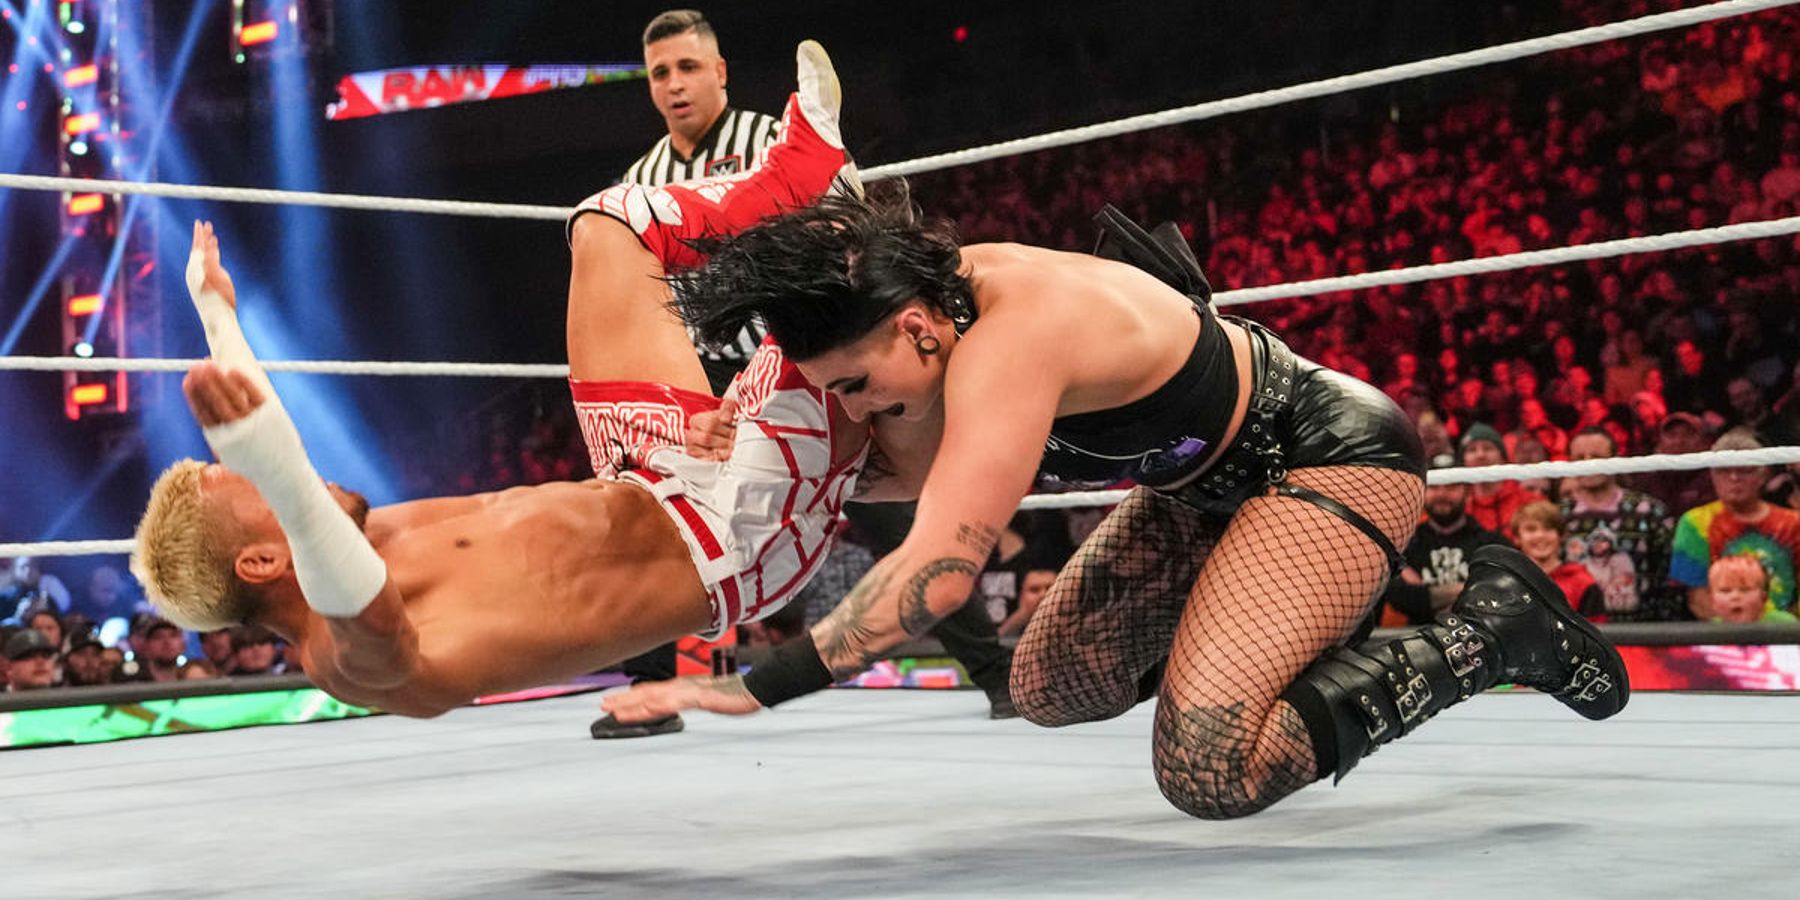 Rhea Ripley delivers a crushing blow to Akira Tozawa during their match on WWE Raw in 2022.